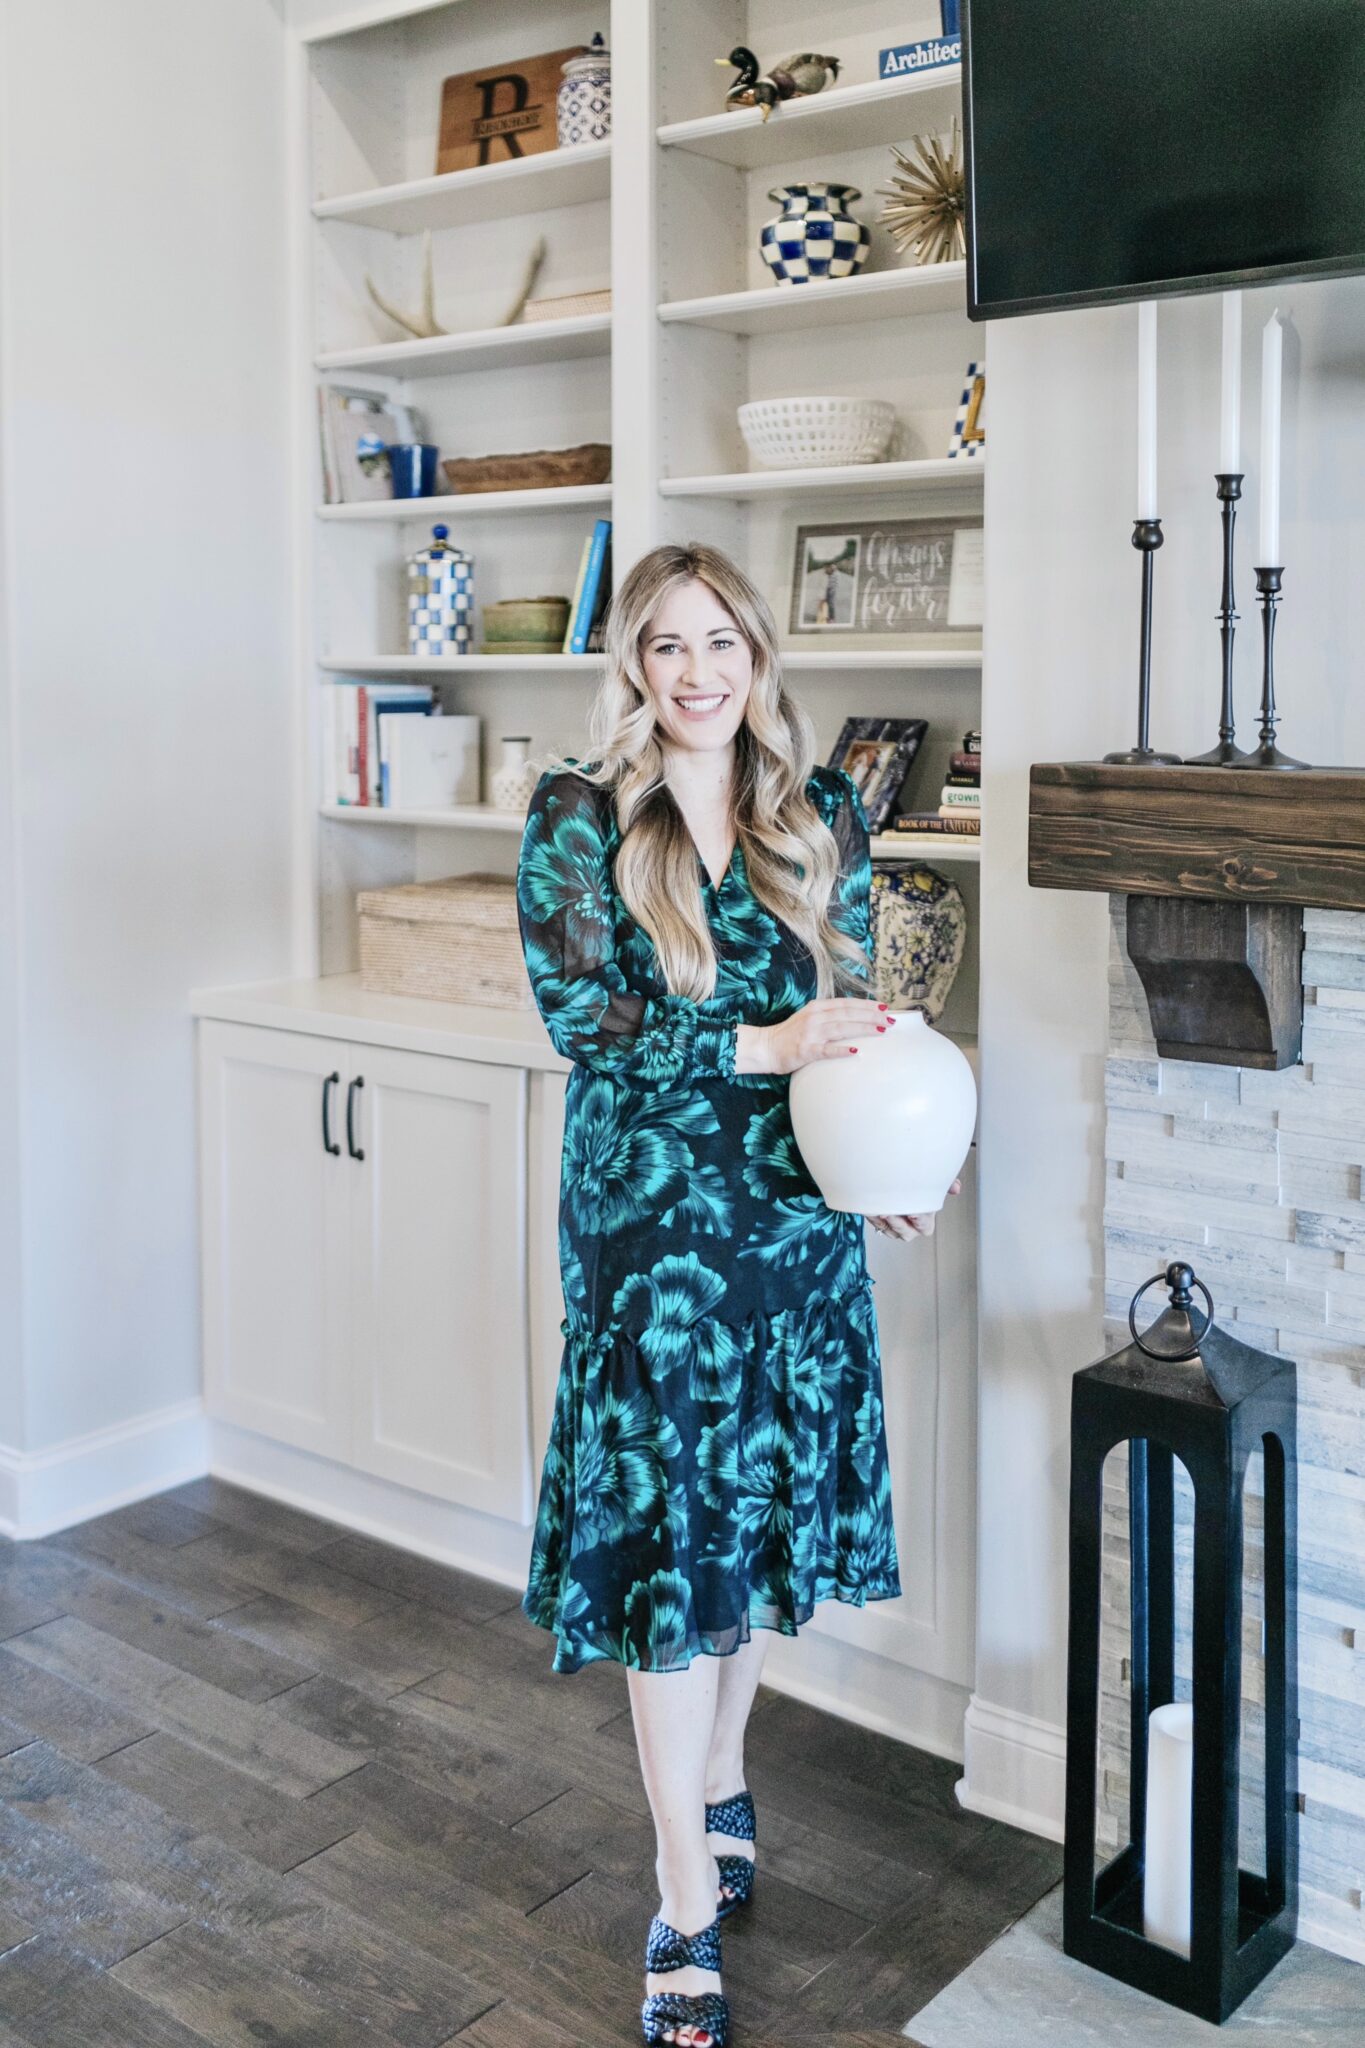 Modern Farmhouse Mantle decor ideas by top US lifestyle blogger, Walking in Memphis in High Heels.